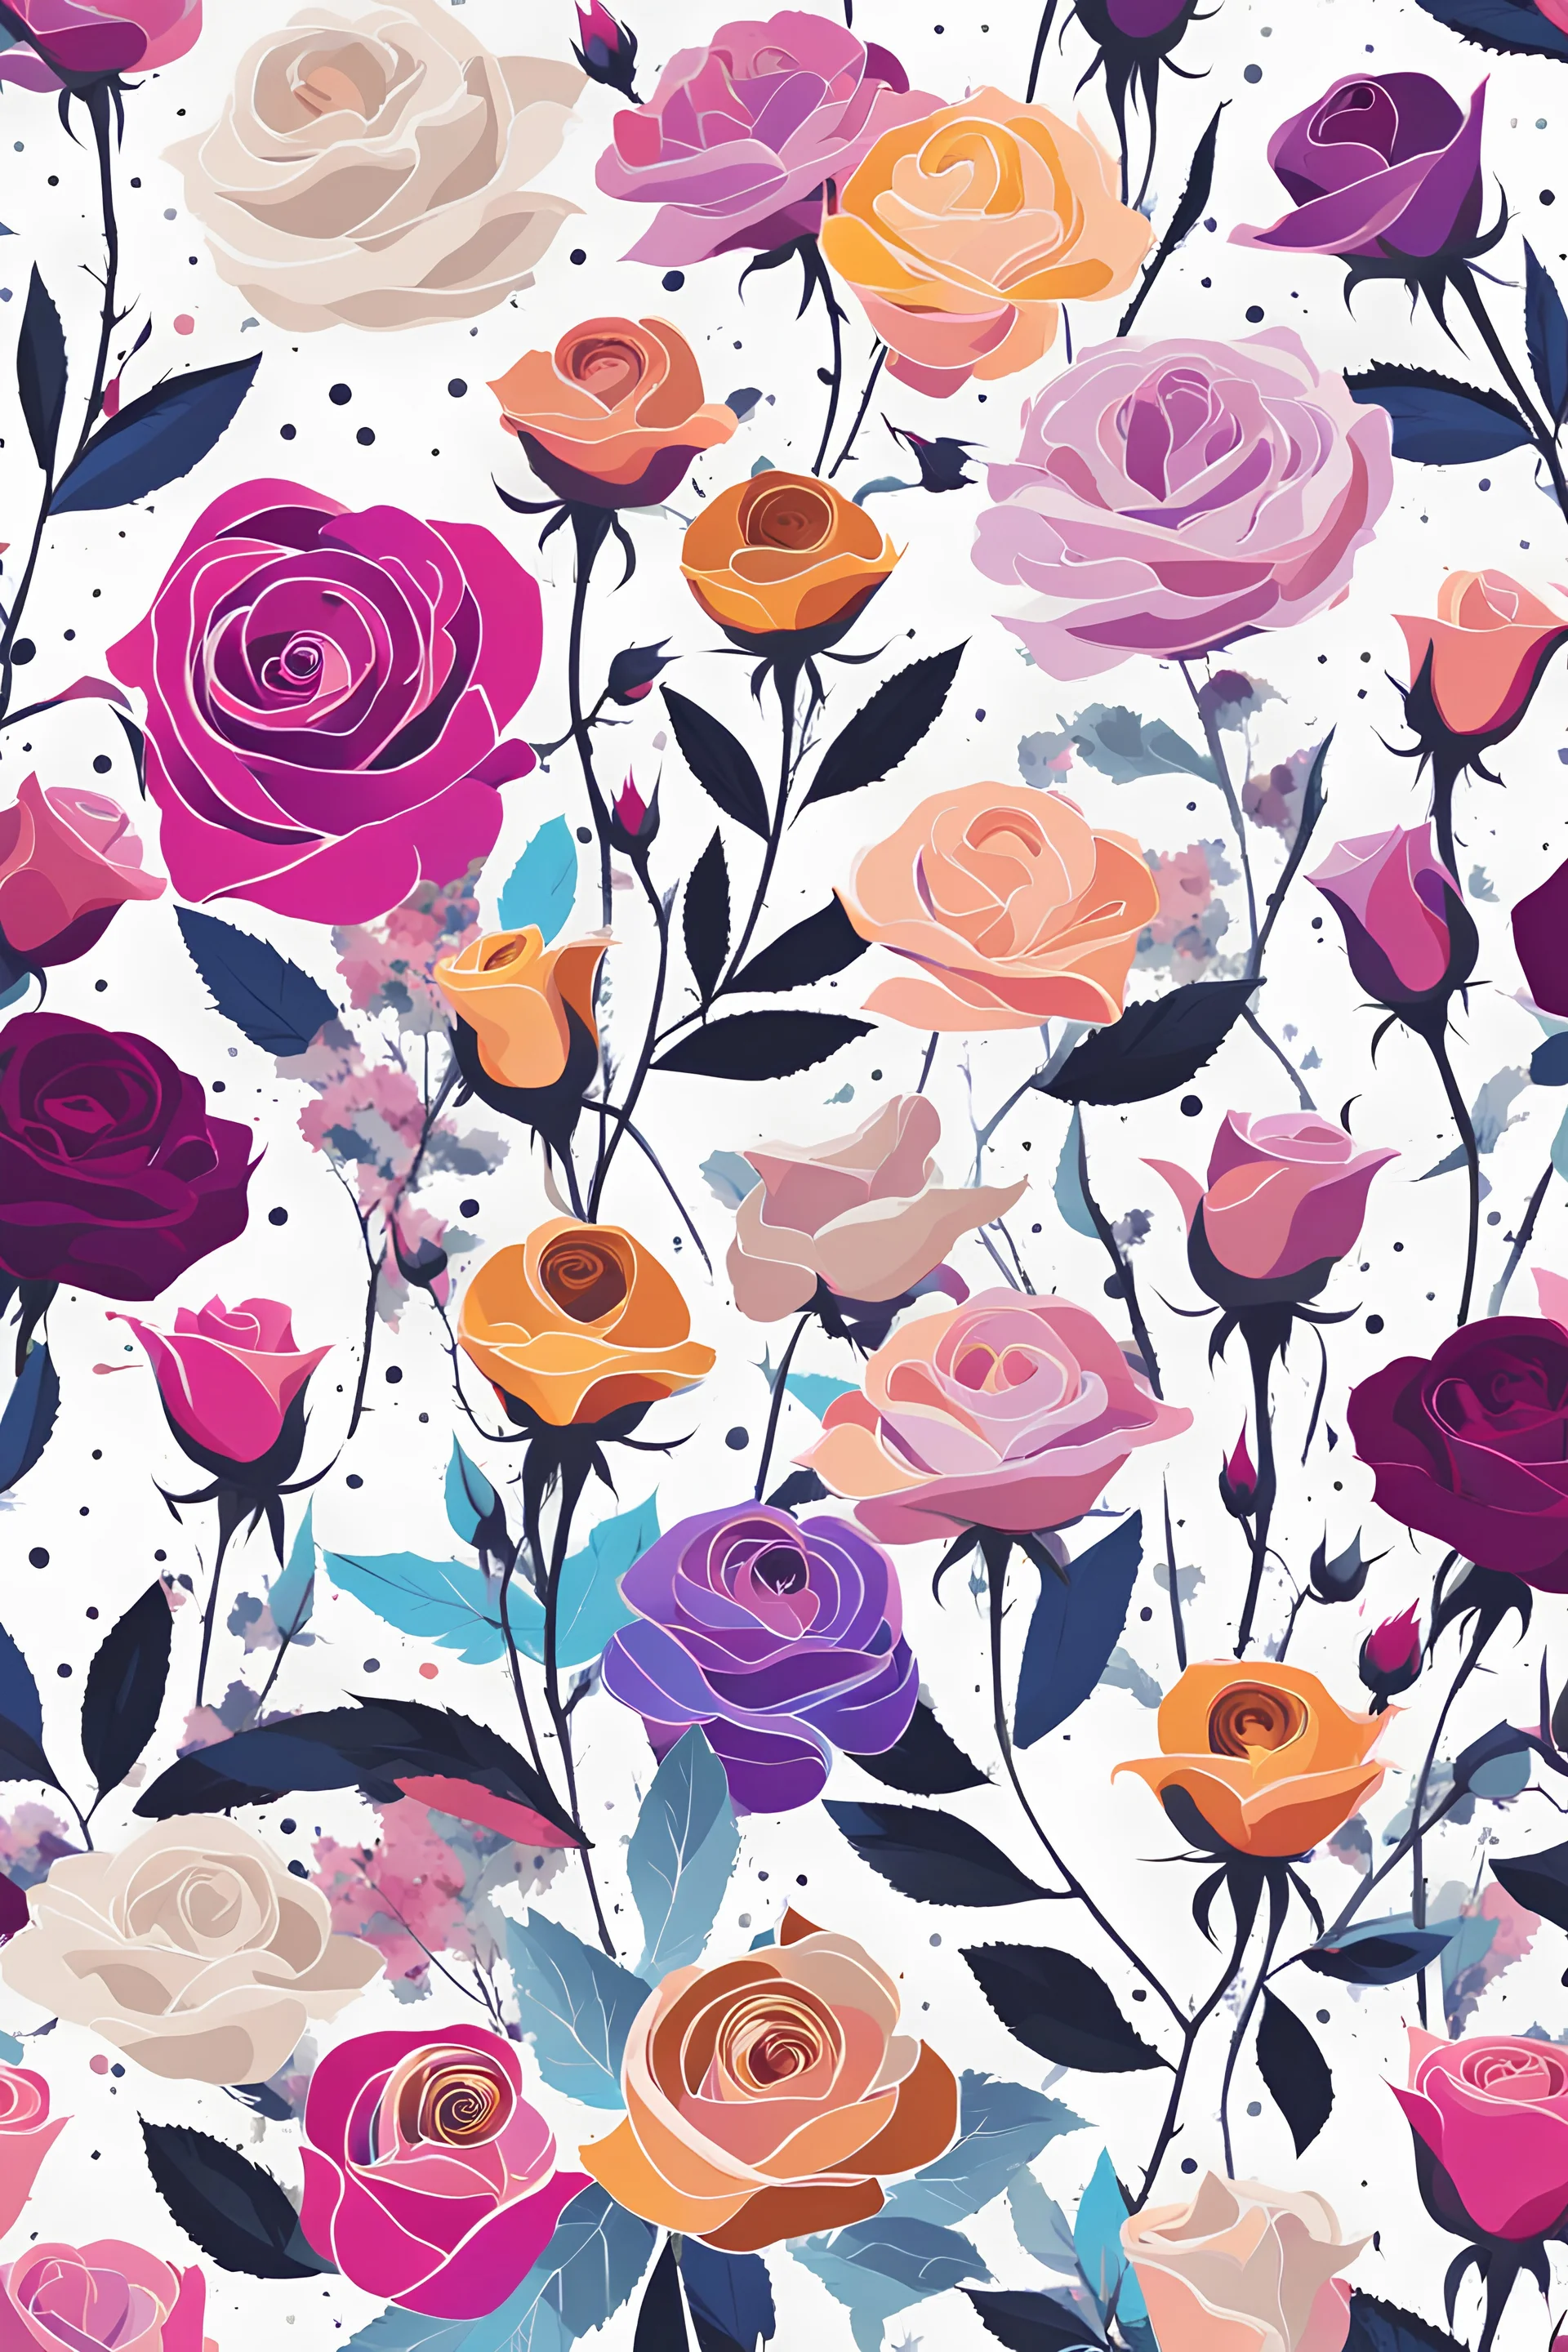 /imagine prompts: template design with colourful, floral pattern stylish, flowers, roses and thorns in dotted-spot, realistic photo